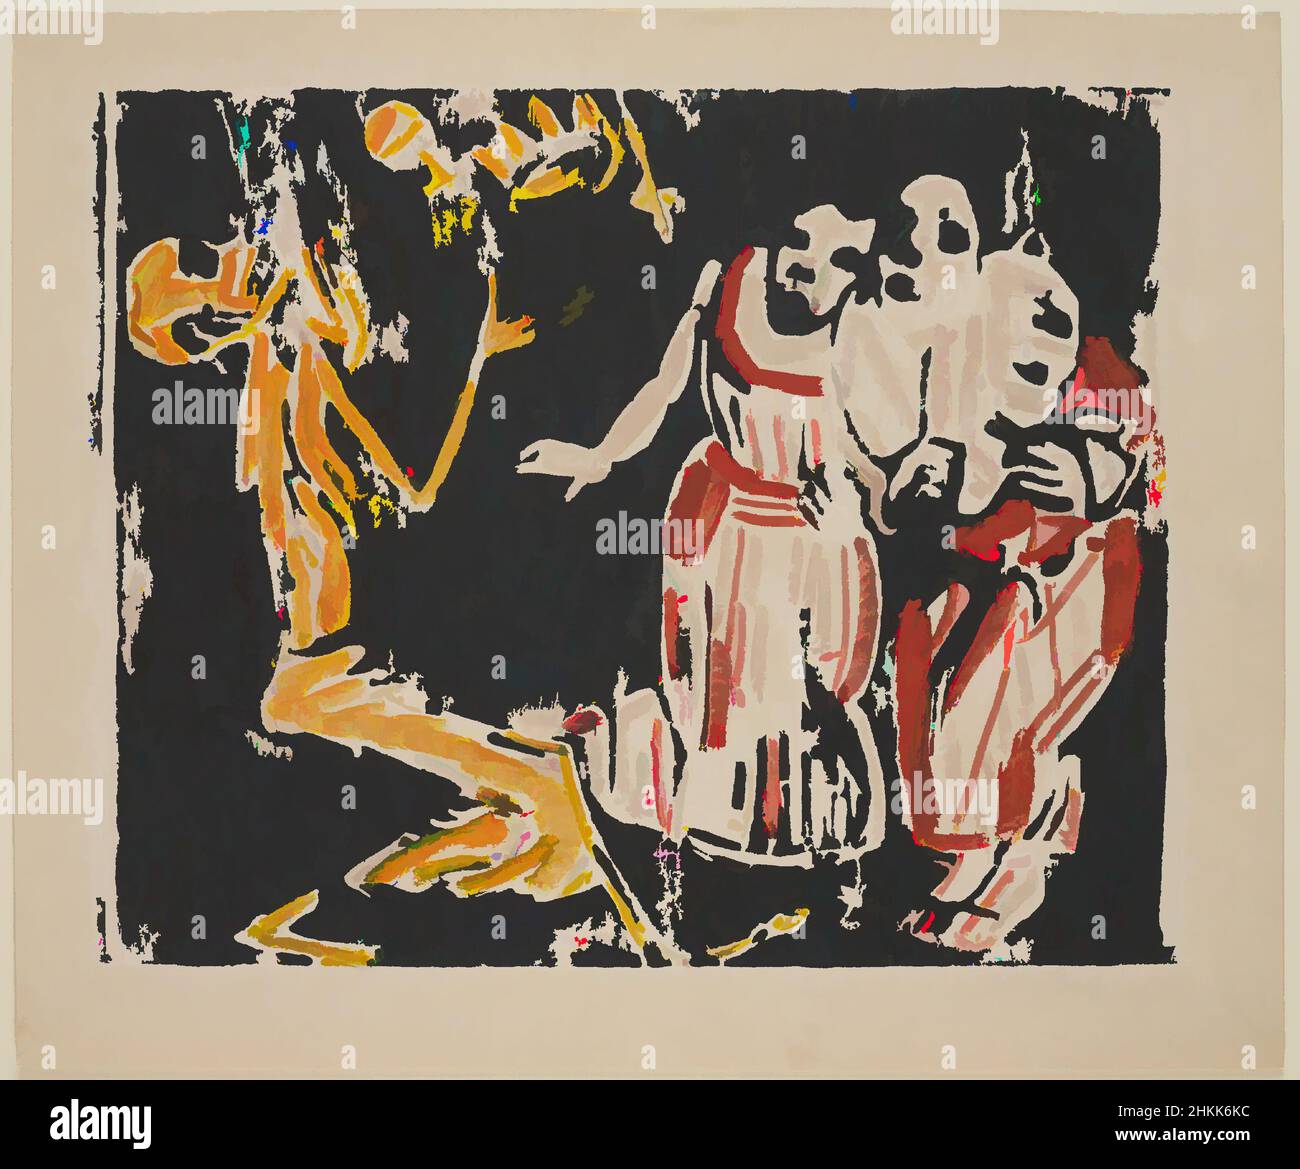 Art inspired by Death as Juggler, Revolution, Tod als Jongleur [Revolution], Christian Rohlfs, German, 1849-1939, Color woodcut in yellow, red, and black on heavy wove paper, Germany, 1918-1919, Image: 14 3/8 x 18 1/4 in., 36.5 x 46.4 cm, fear, scary, skeleton, spooky, Classic works modernized by Artotop with a splash of modernity. Shapes, color and value, eye-catching visual impact on art. Emotions through freedom of artworks in a contemporary way. A timeless message pursuing a wildly creative new direction. Artists turning to the digital medium and creating the Artotop NFT Stock Photo